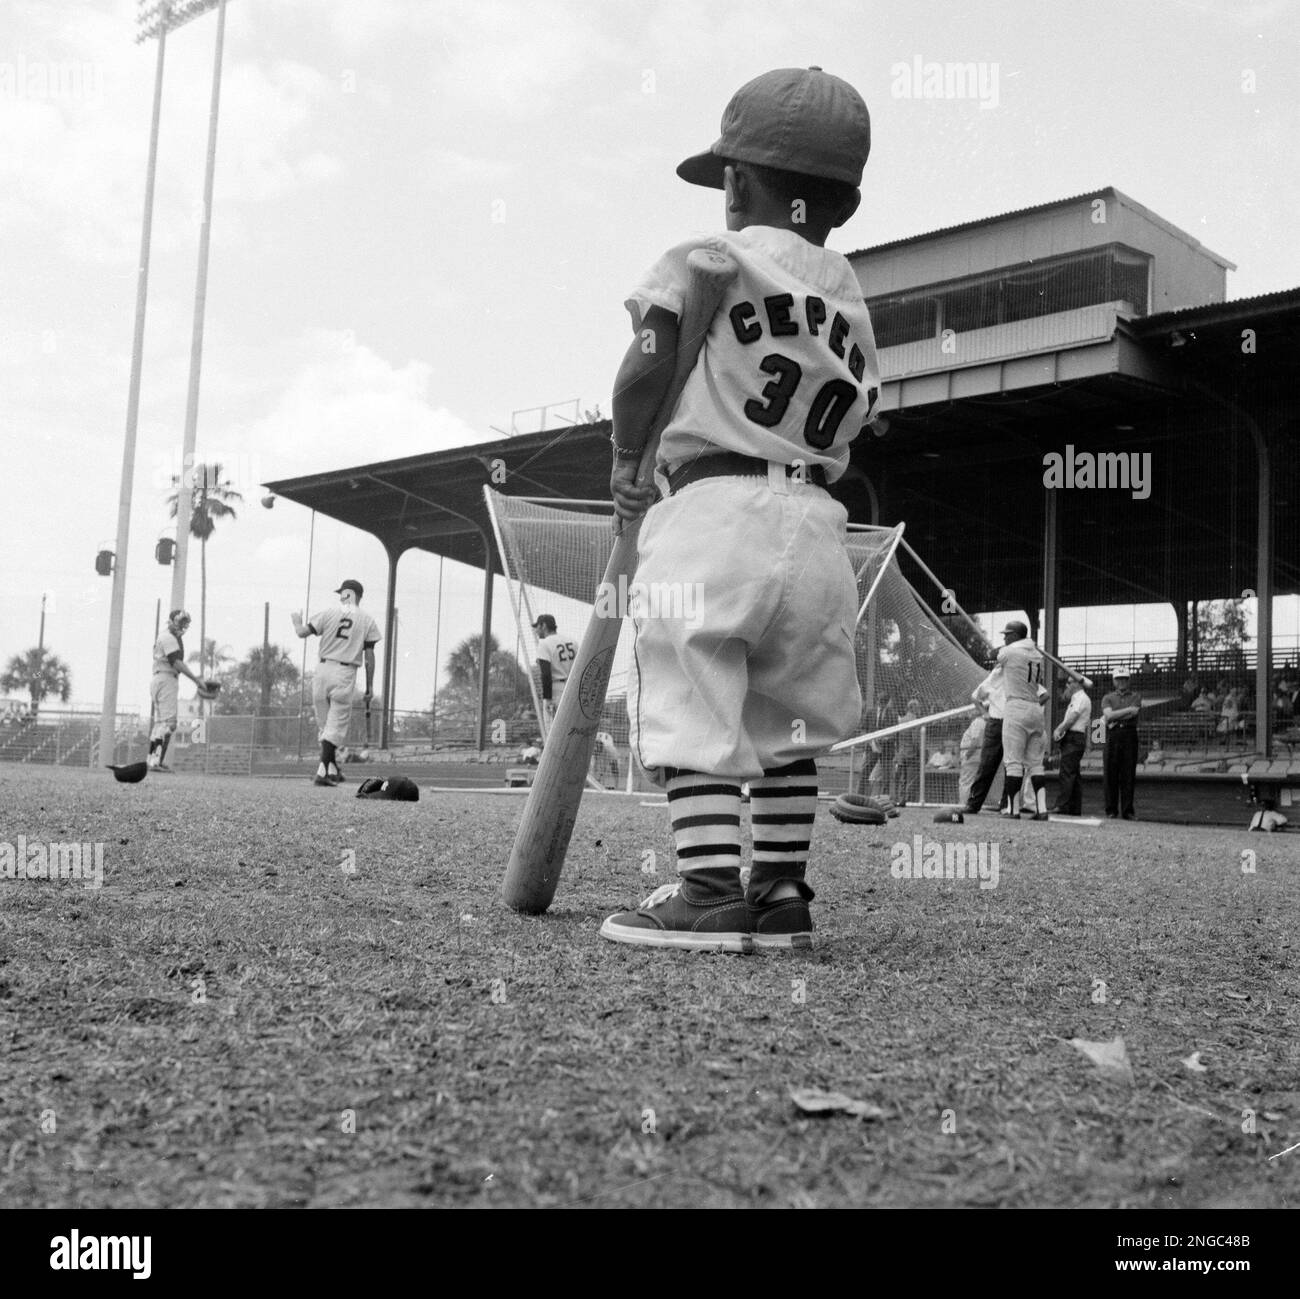 Orlando Cepeda, Jr., two year old son of the St. Louis Cardinals first  baseman, is seen in uniform with the New York Yankees in the background at  batting practice, March 29, 1968. (